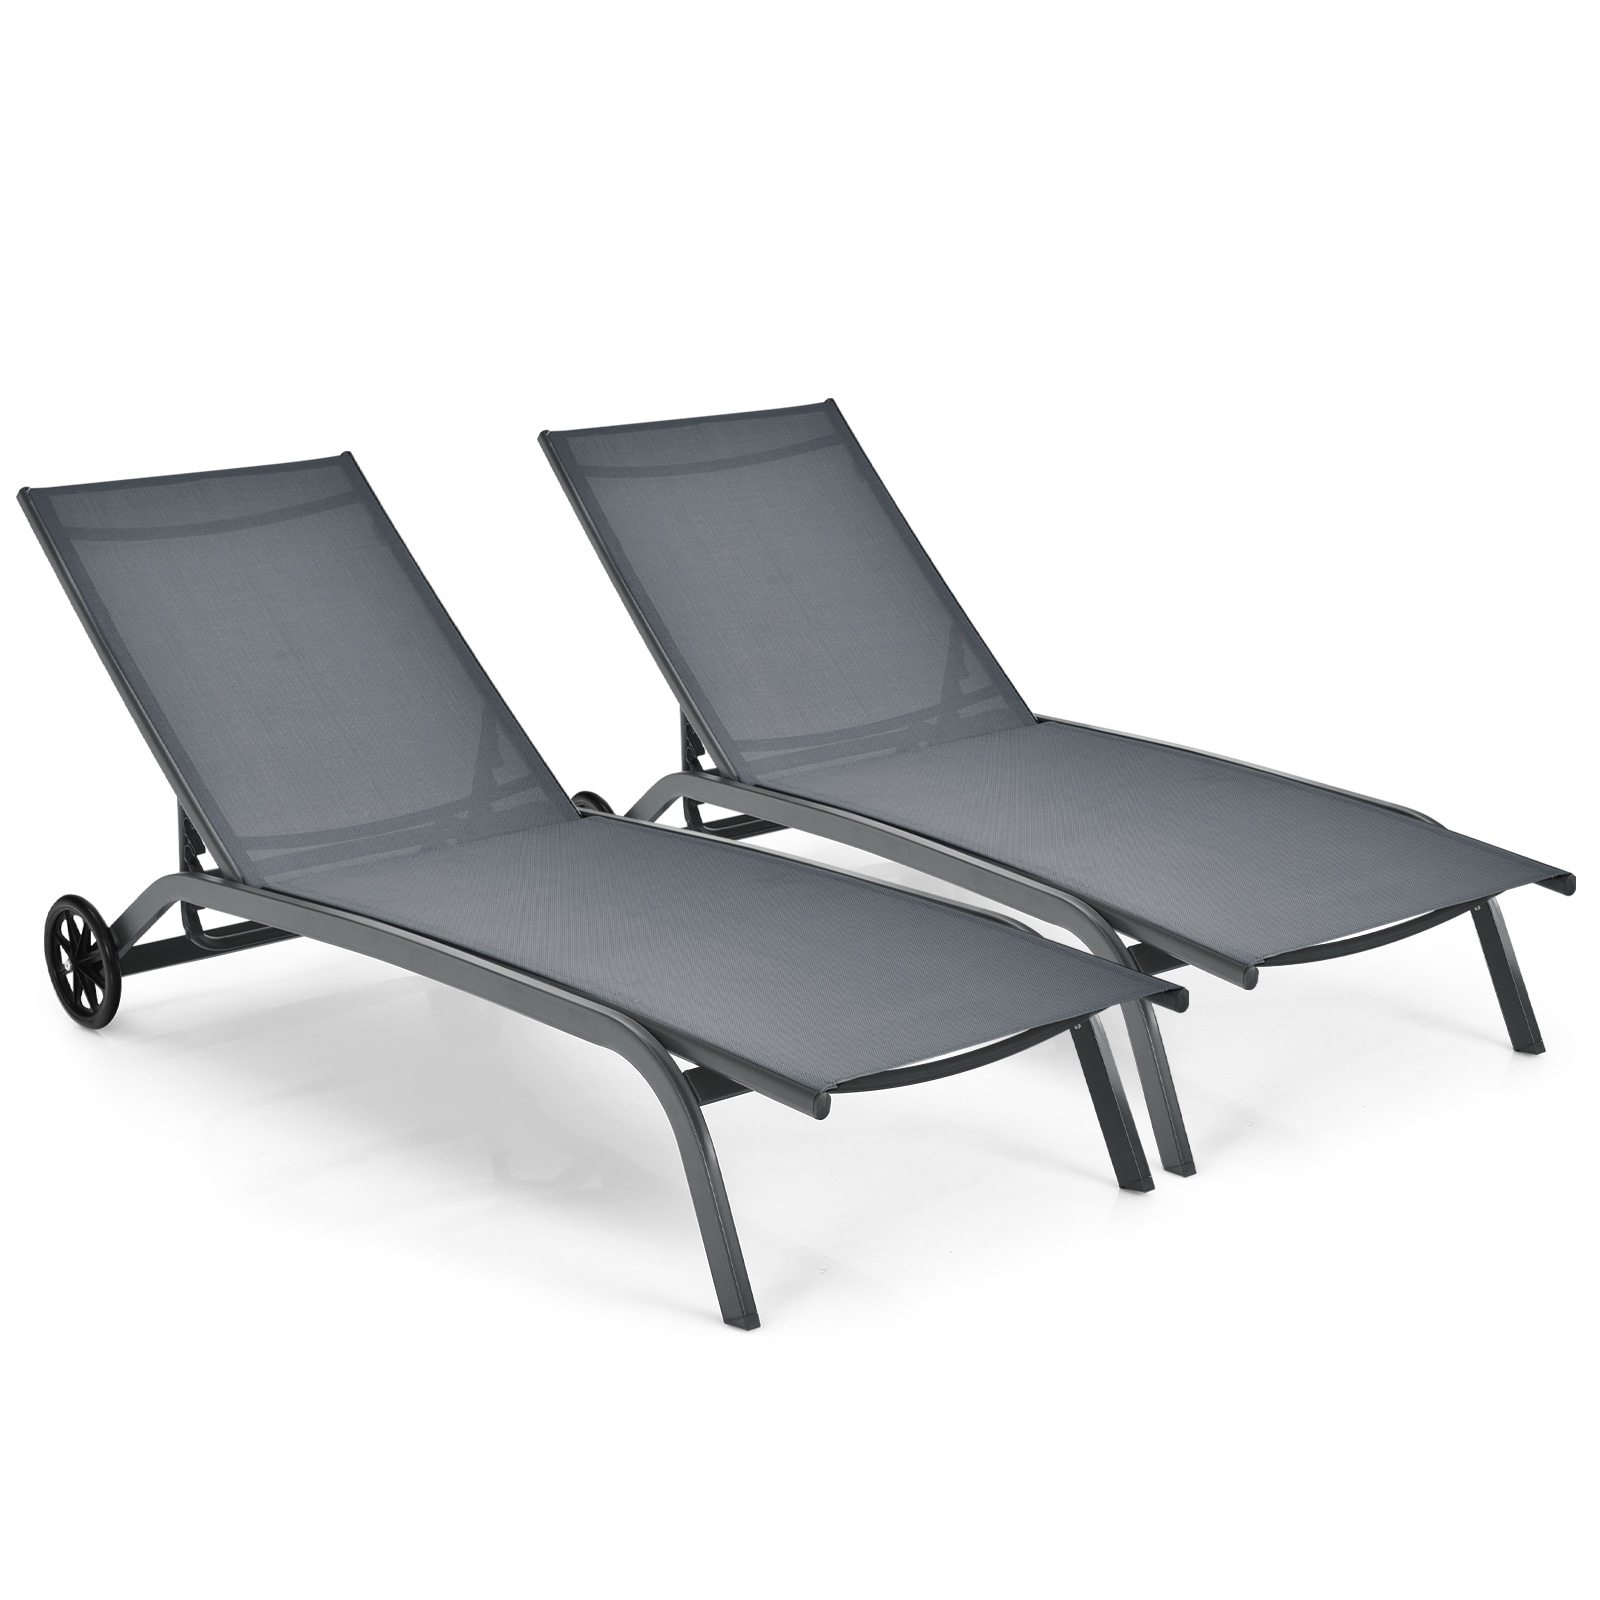 Patio Lounge Chairs Outdoor Chaise Lounge With 6 Adjustable Positions